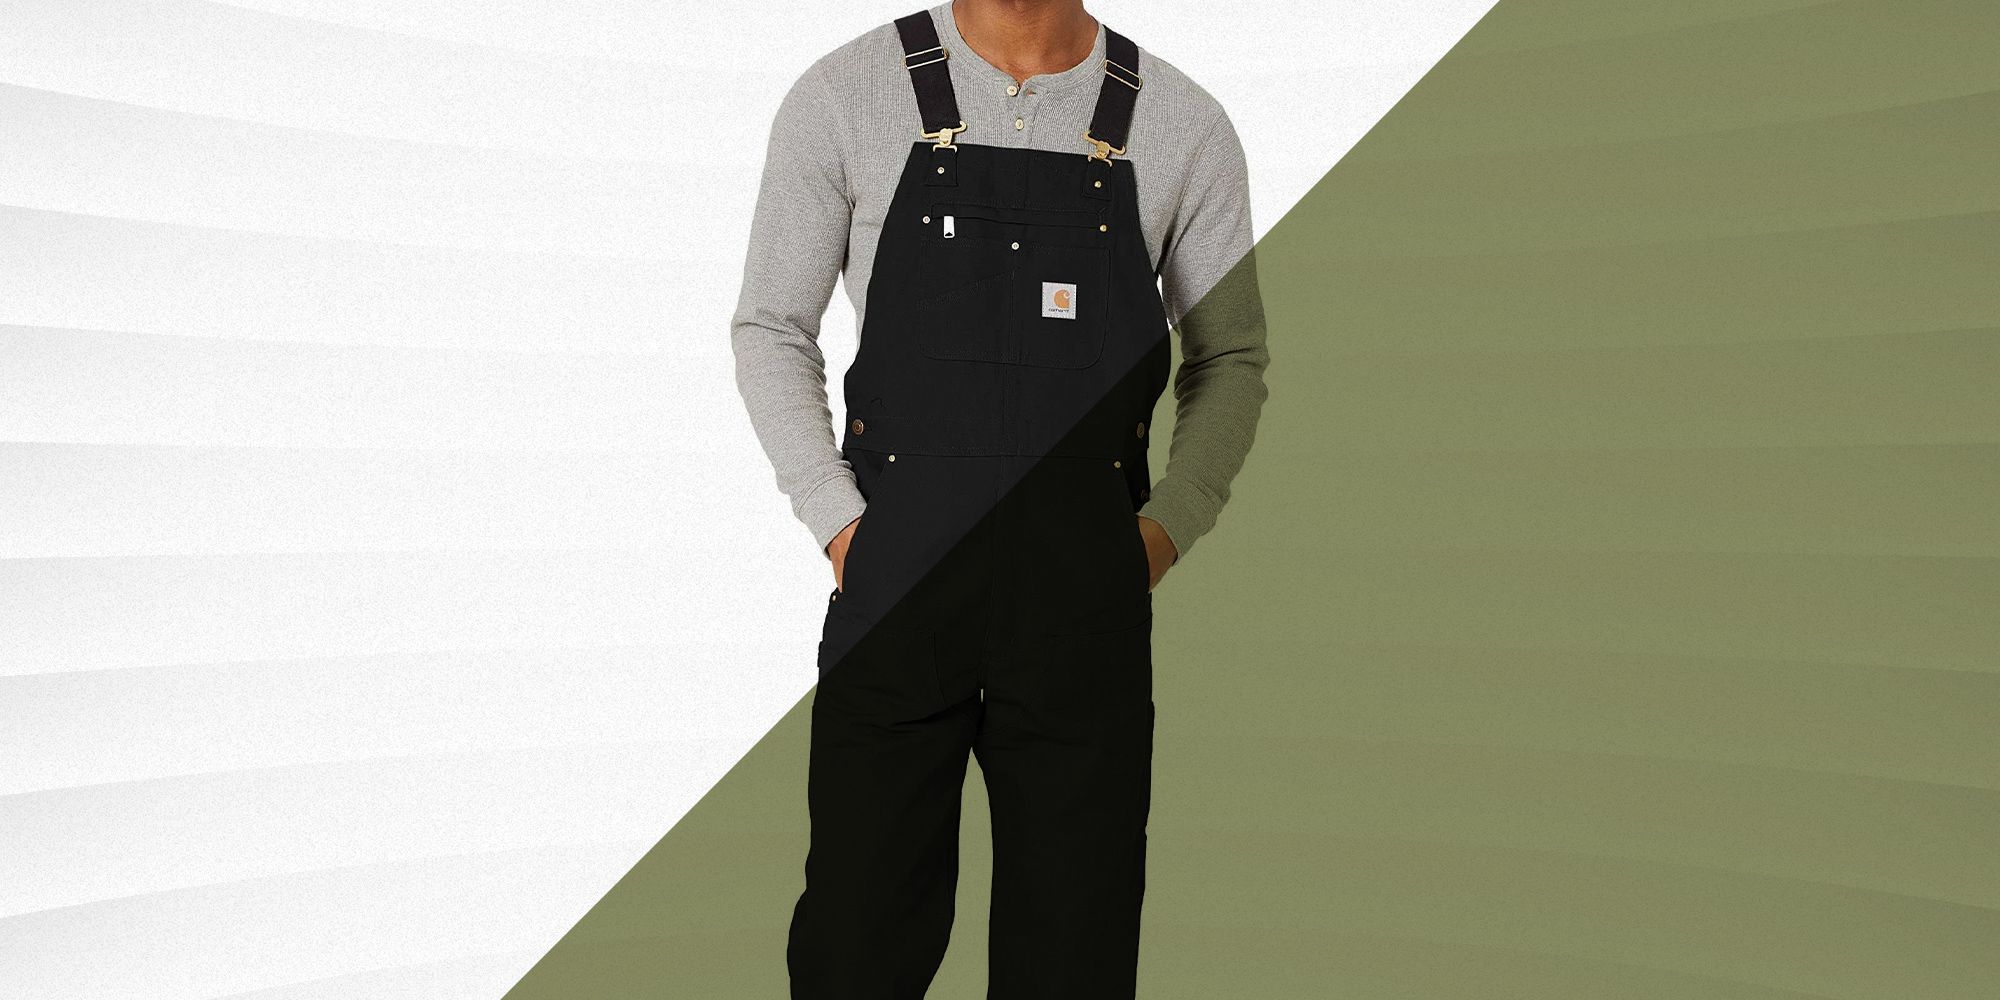 Why are men burning their overalls?